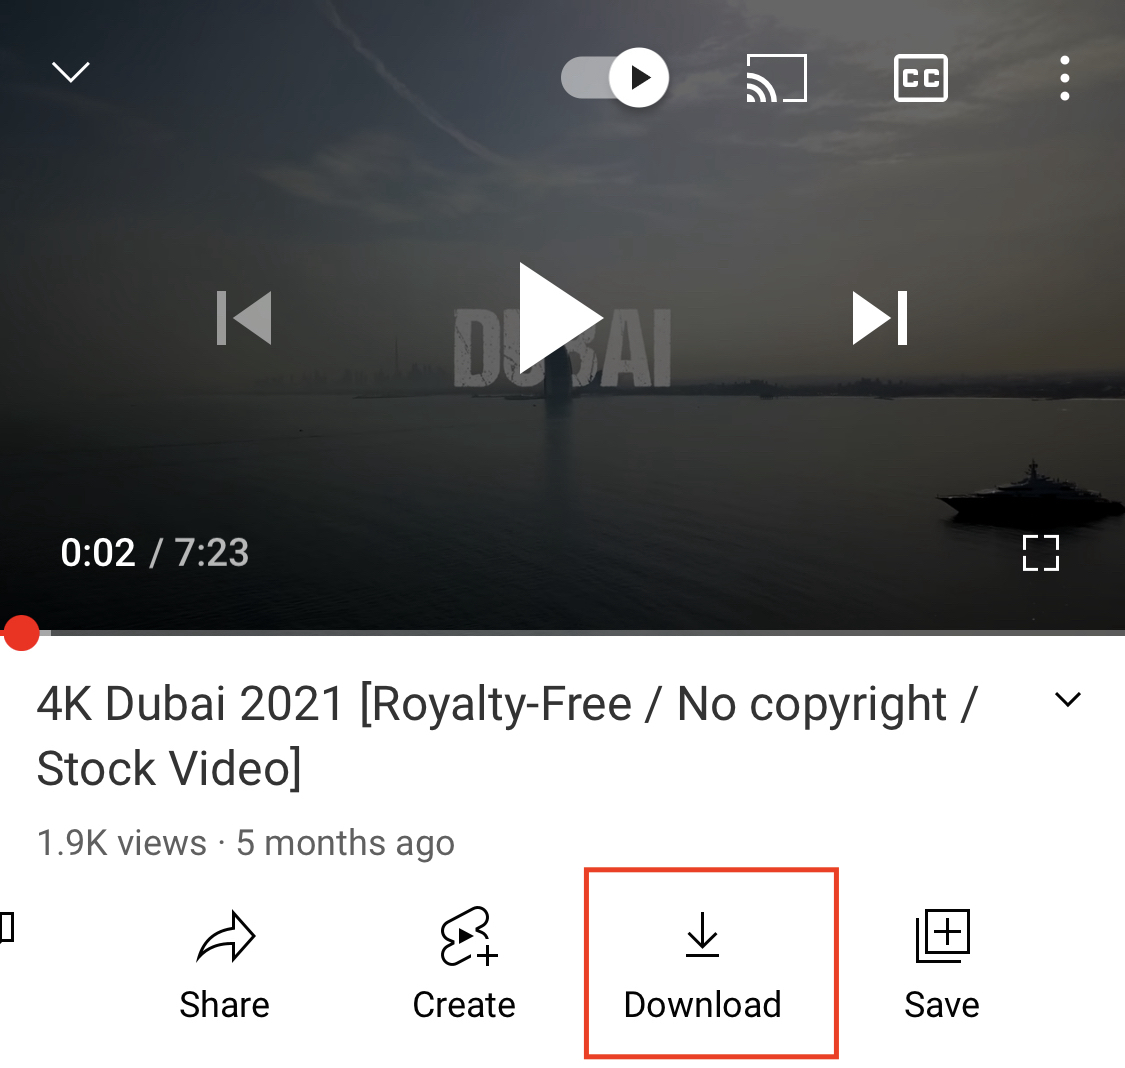 How to download Youtube Videos